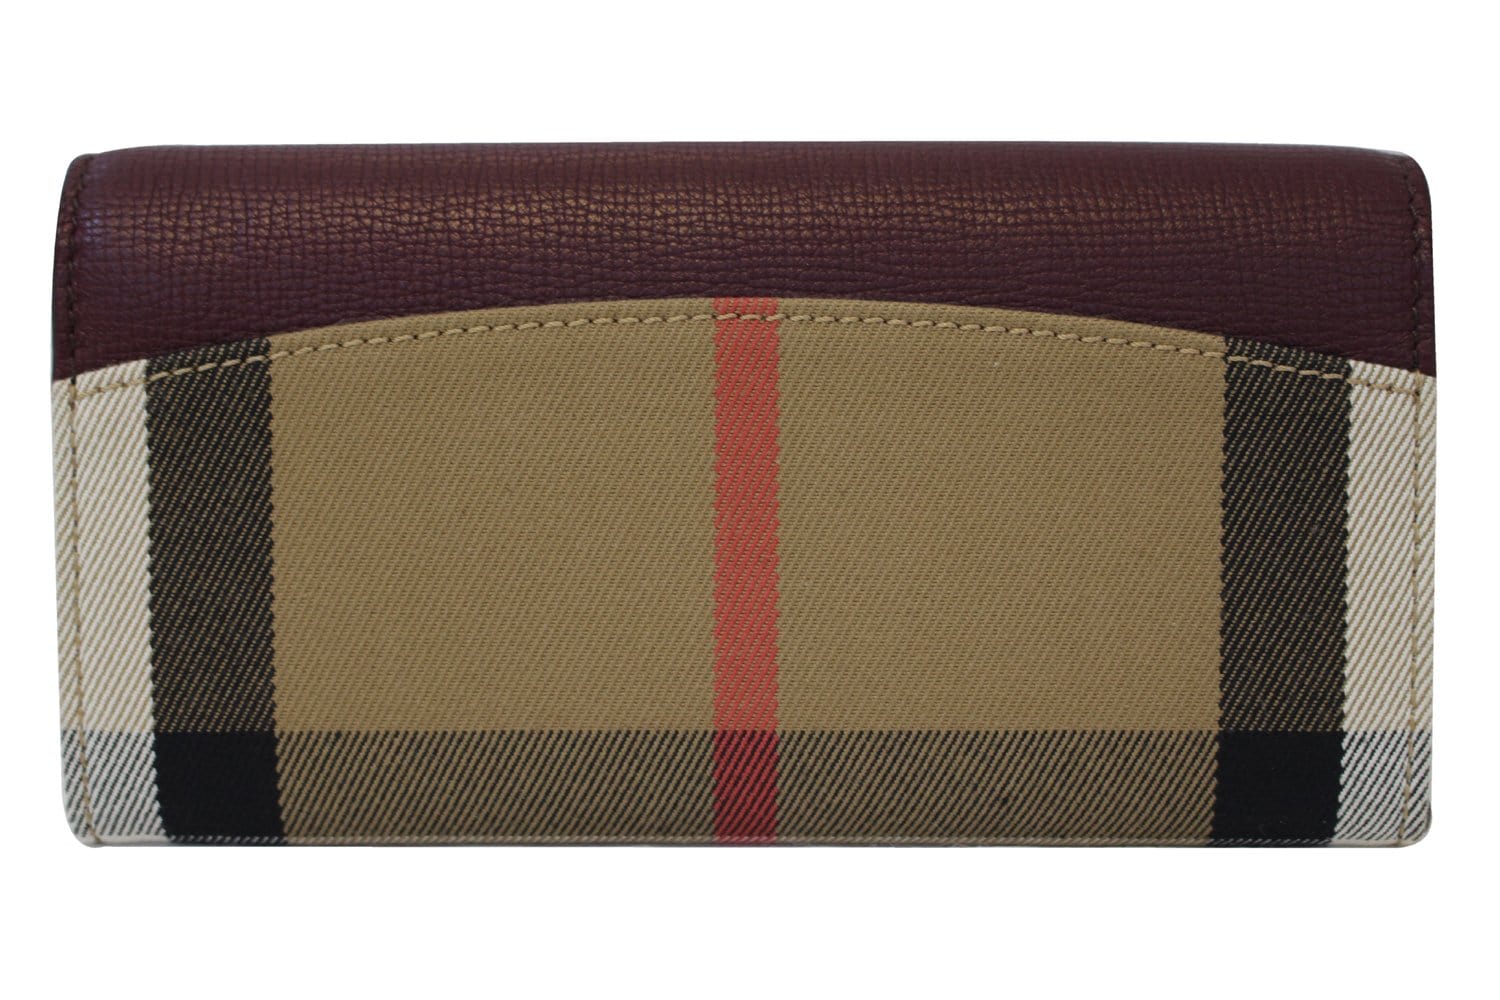 BURBERRY Wallet Check Leather Burgundy For Women